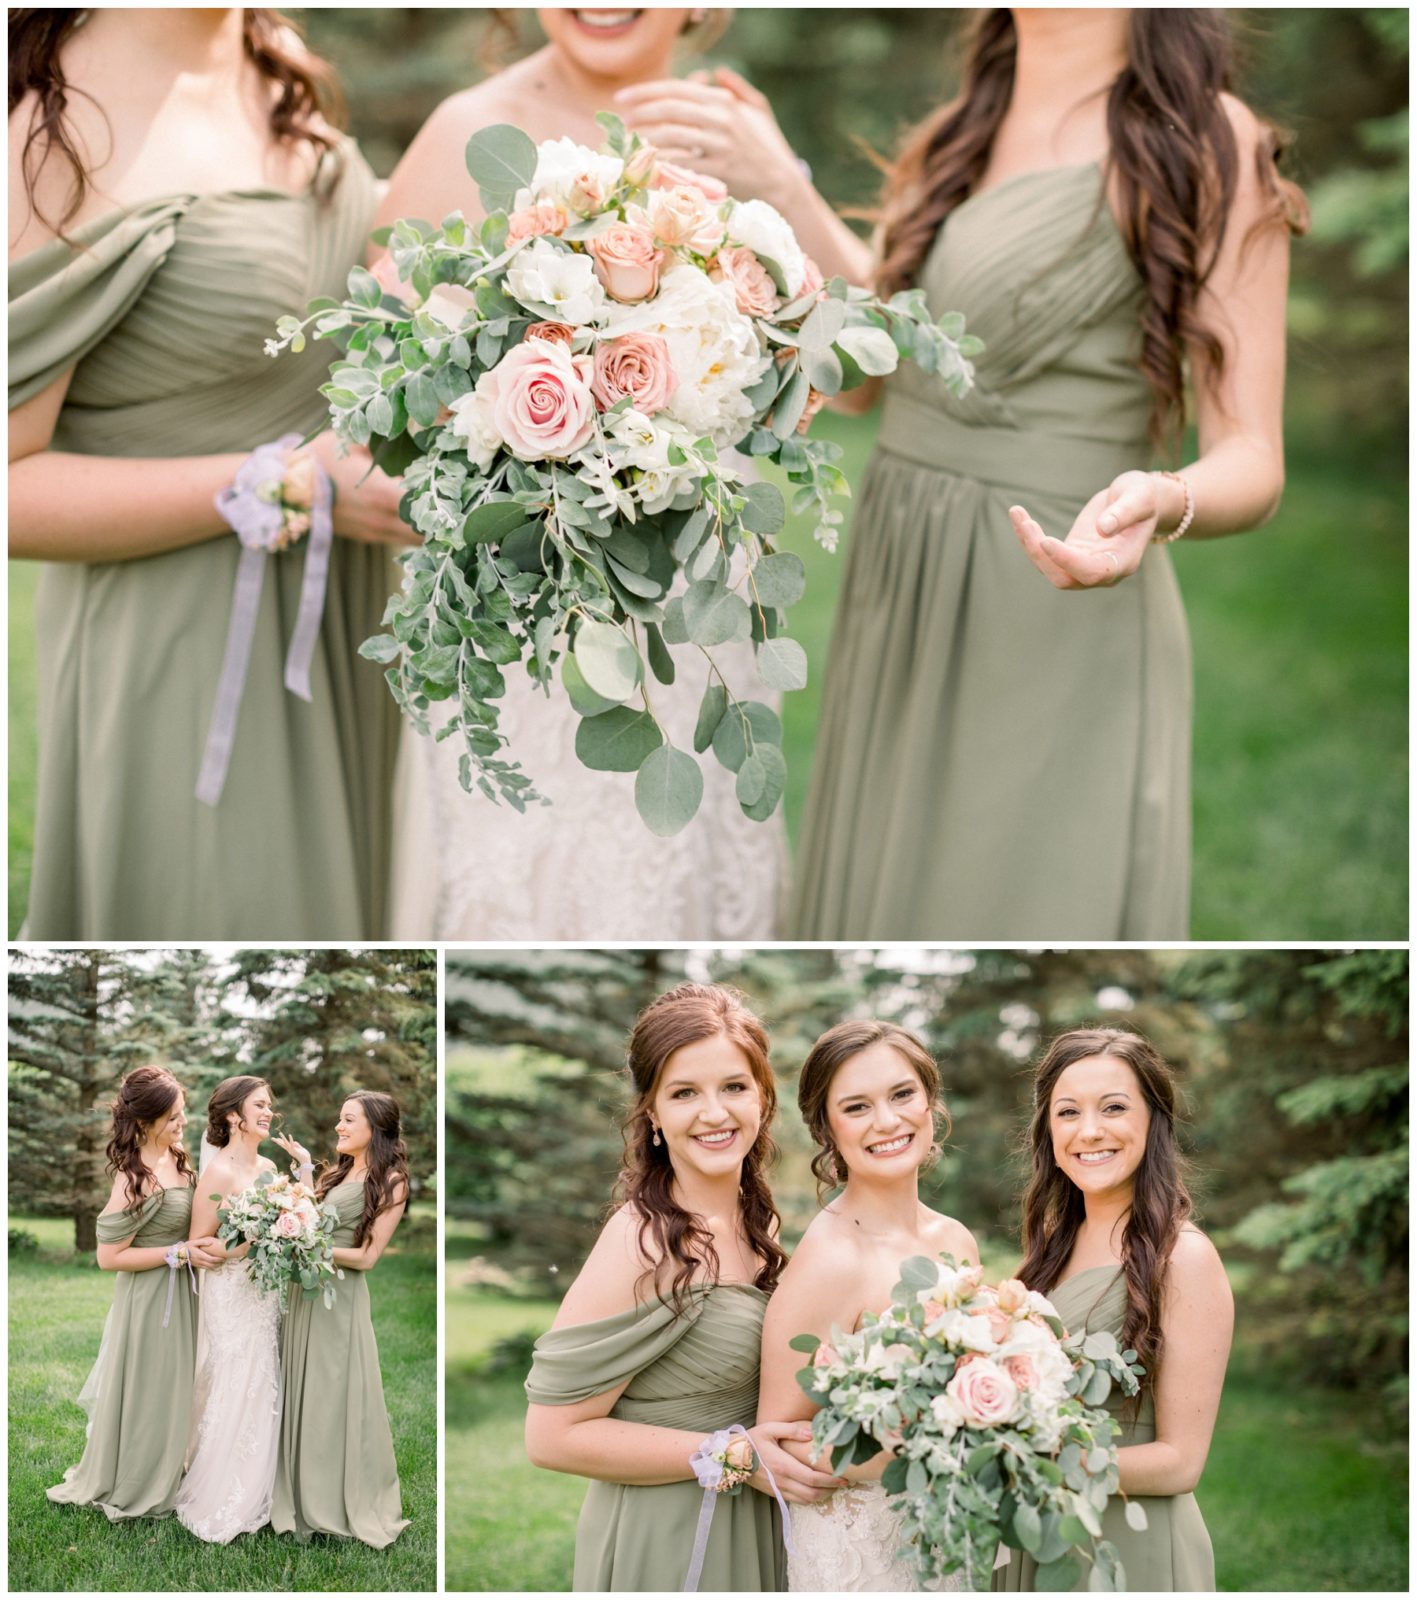 Compilation of photos of the bride and two bridesmaids.